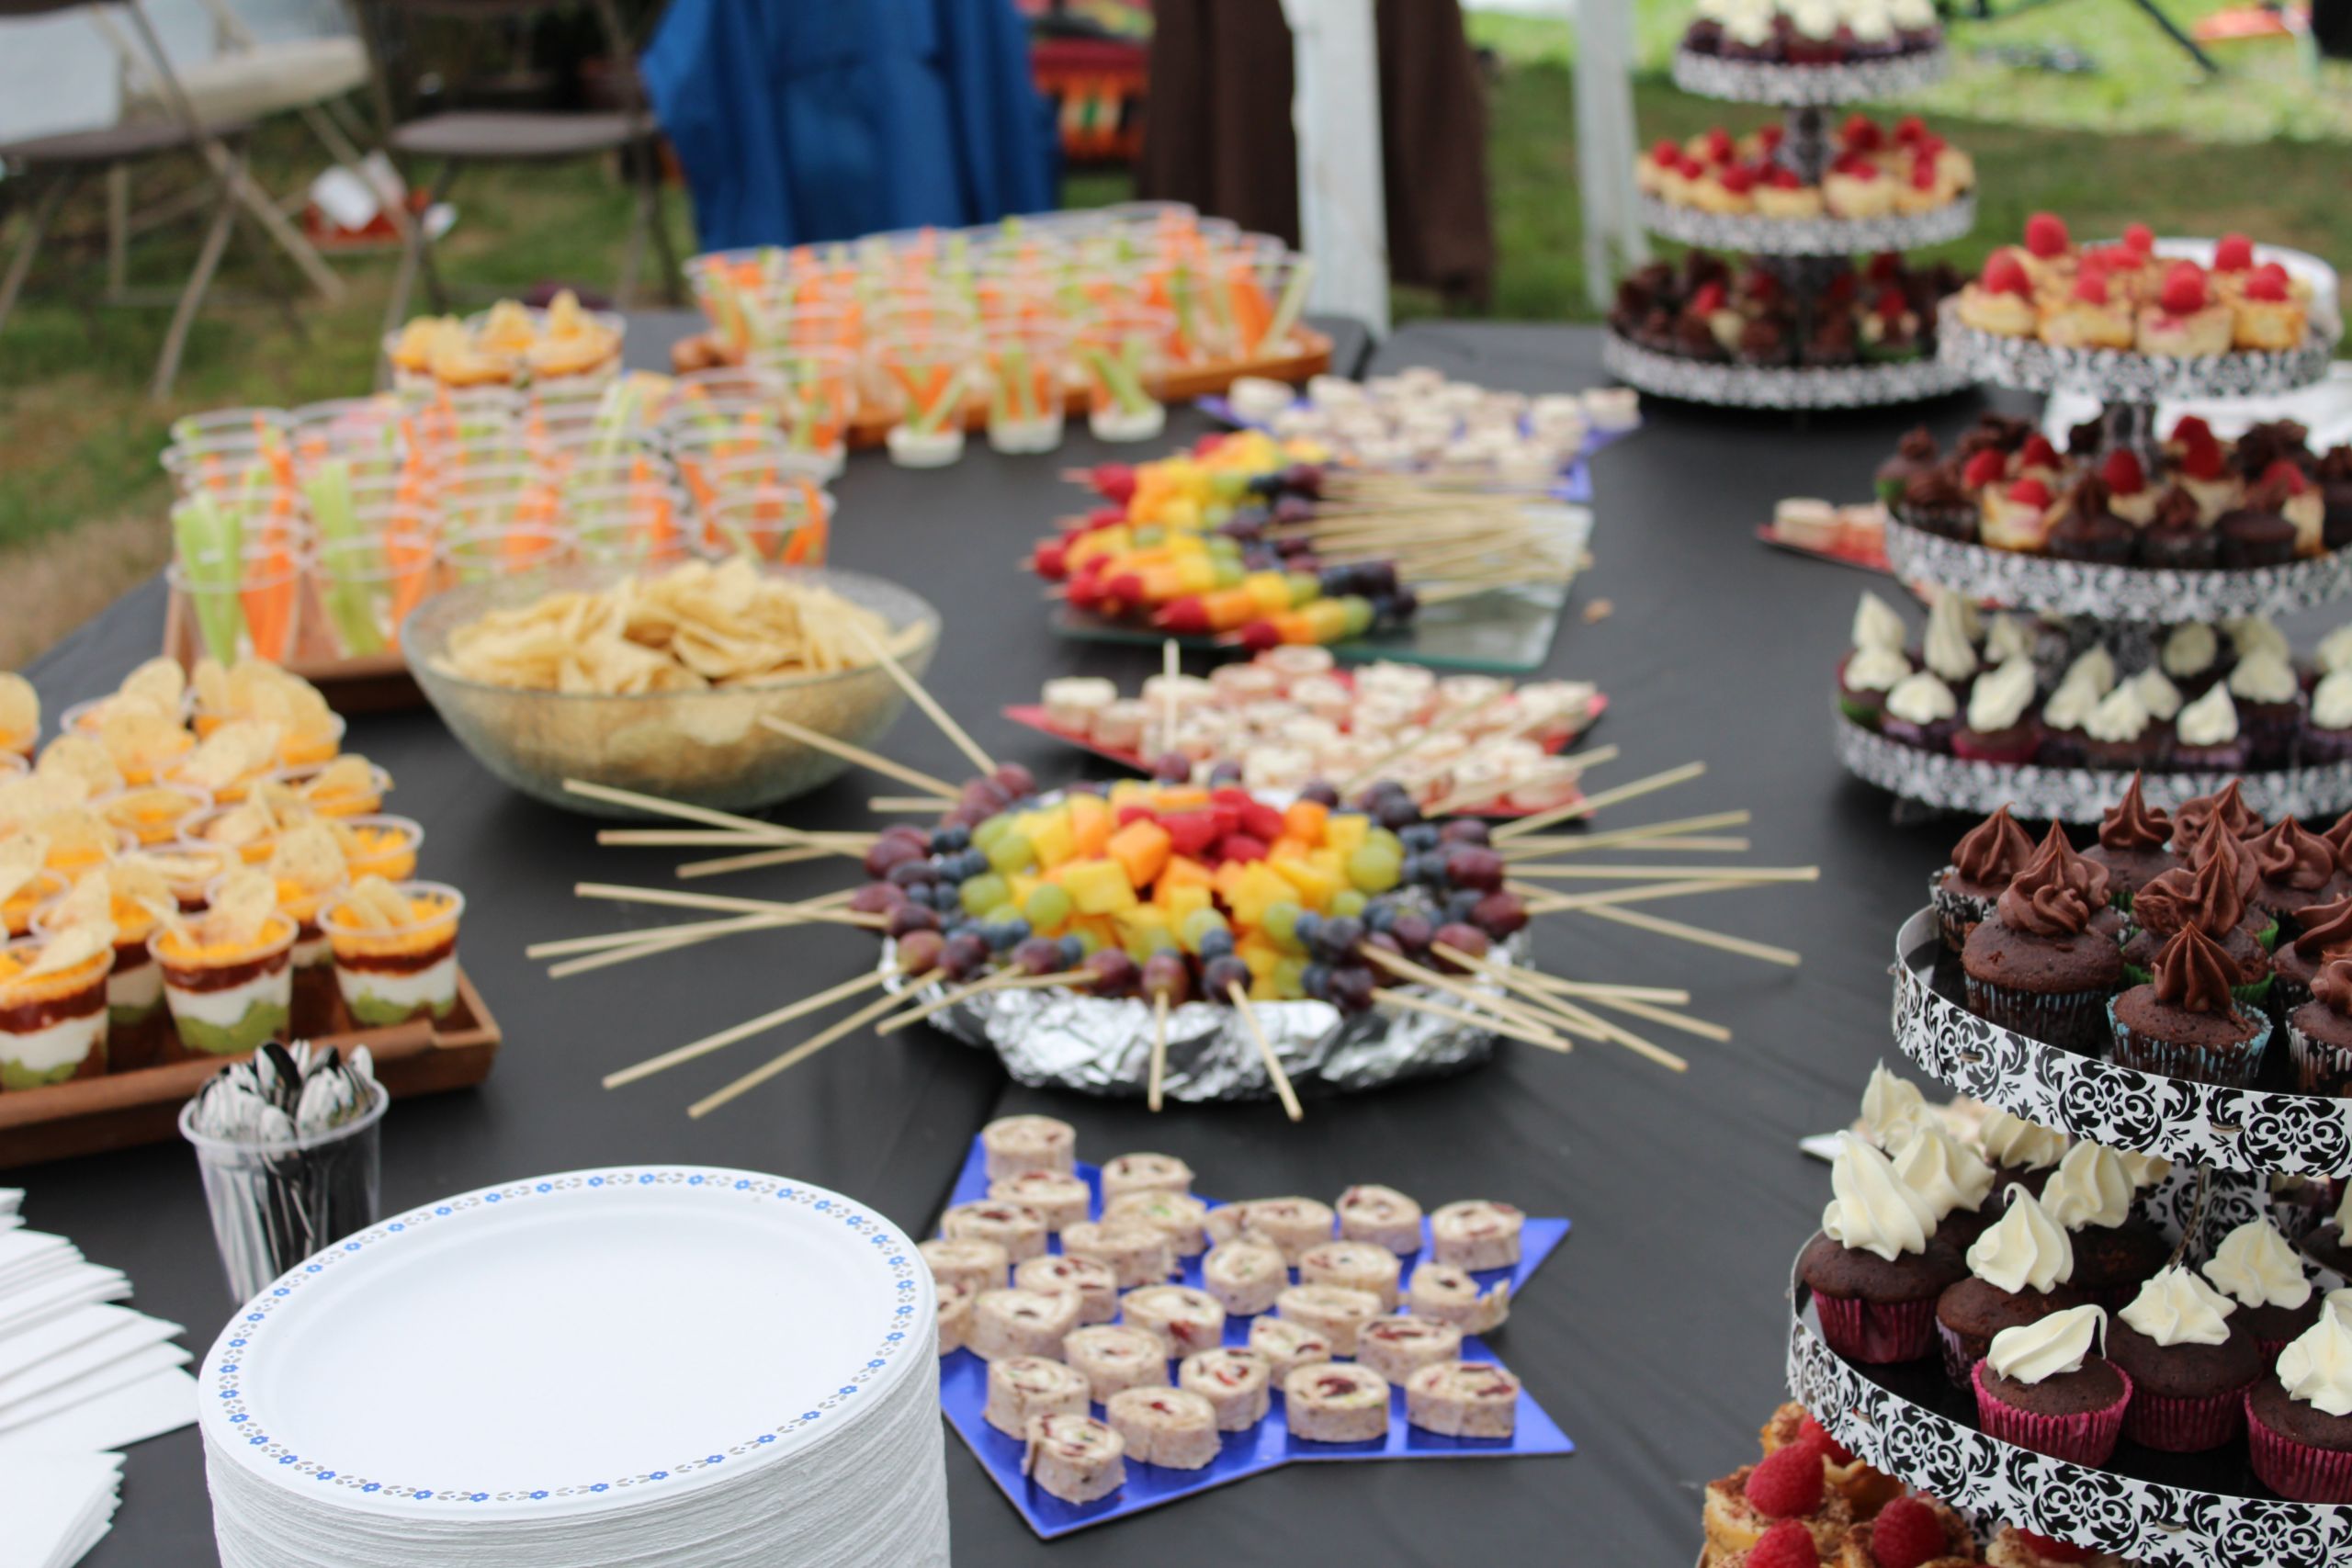 Party Food Ideas For Graduation
 Party Food